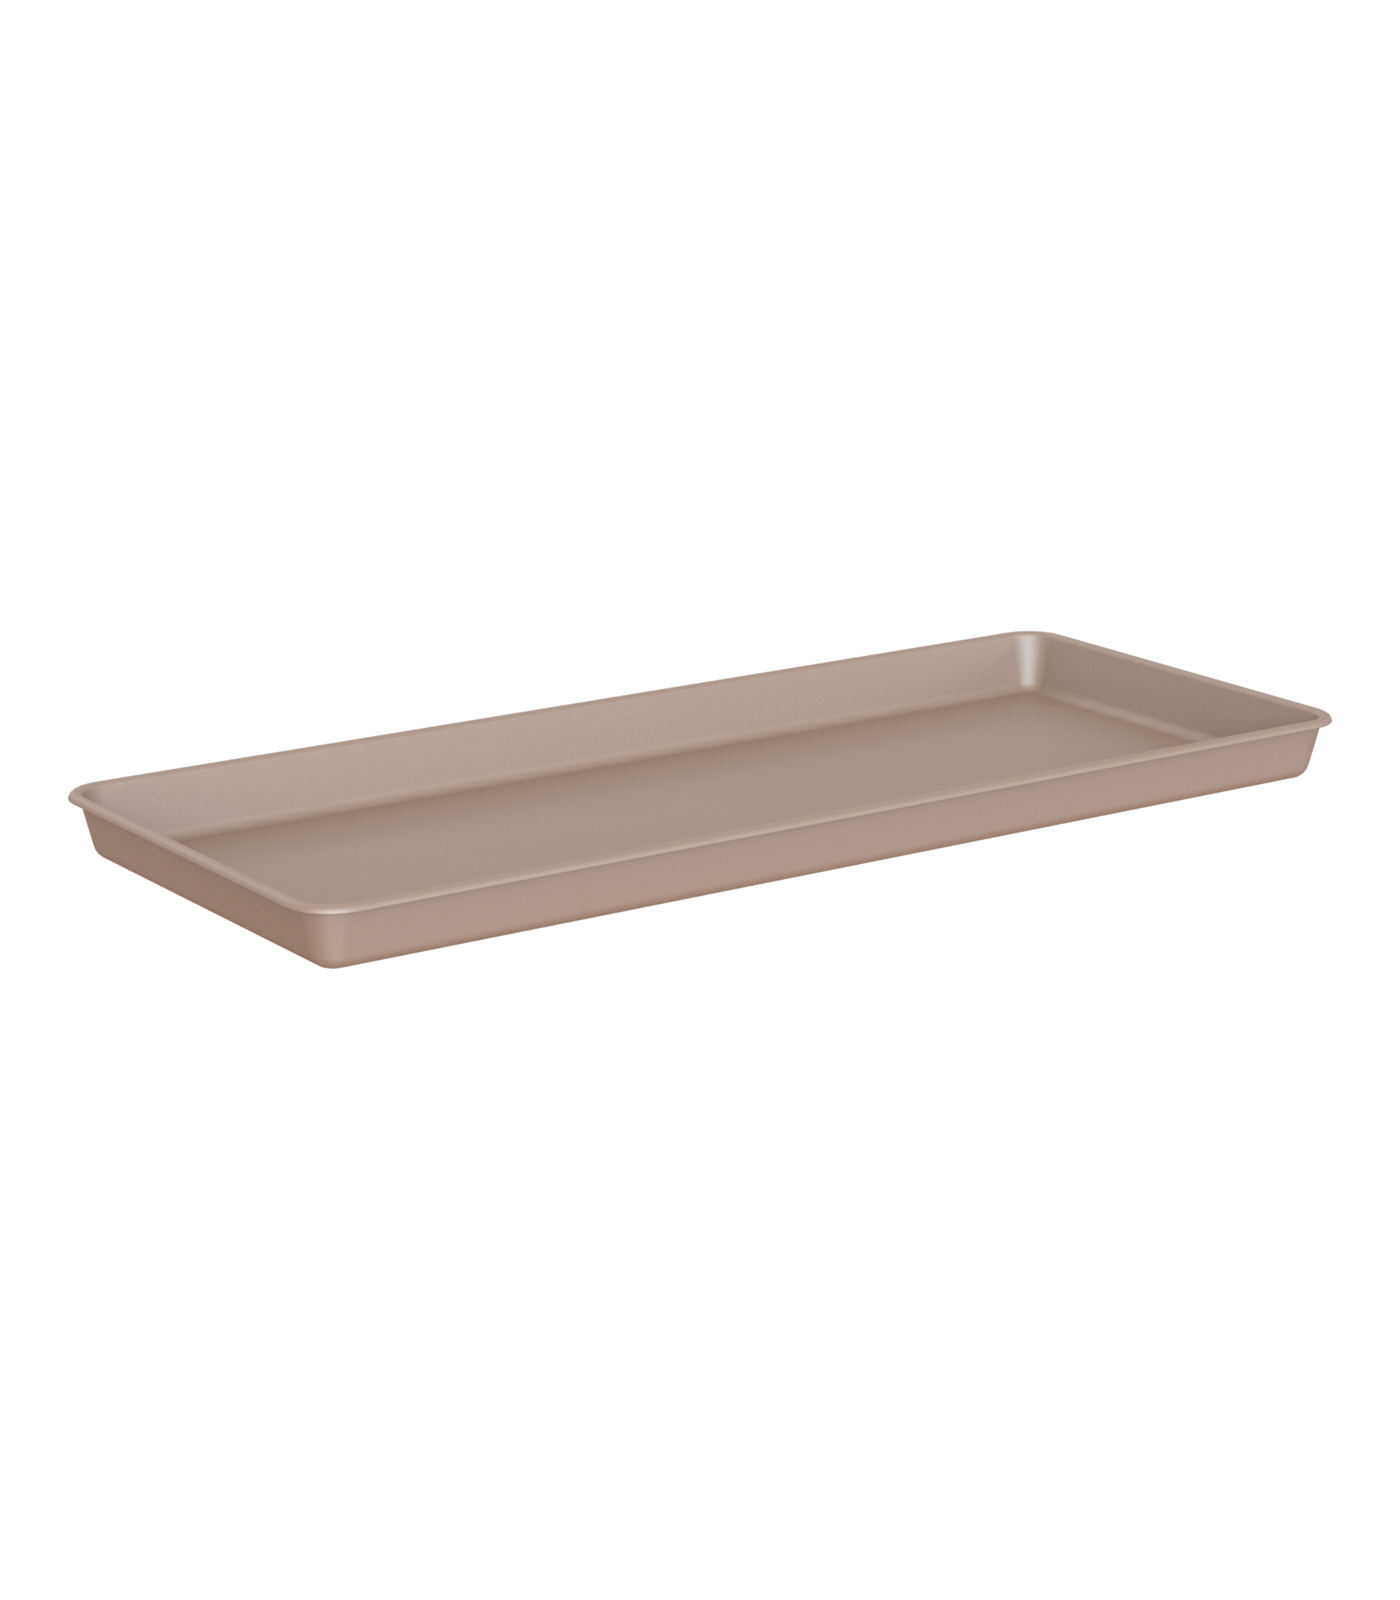 plastic-saucer-recyclable-outdoor-rectangular-xl-brown-1